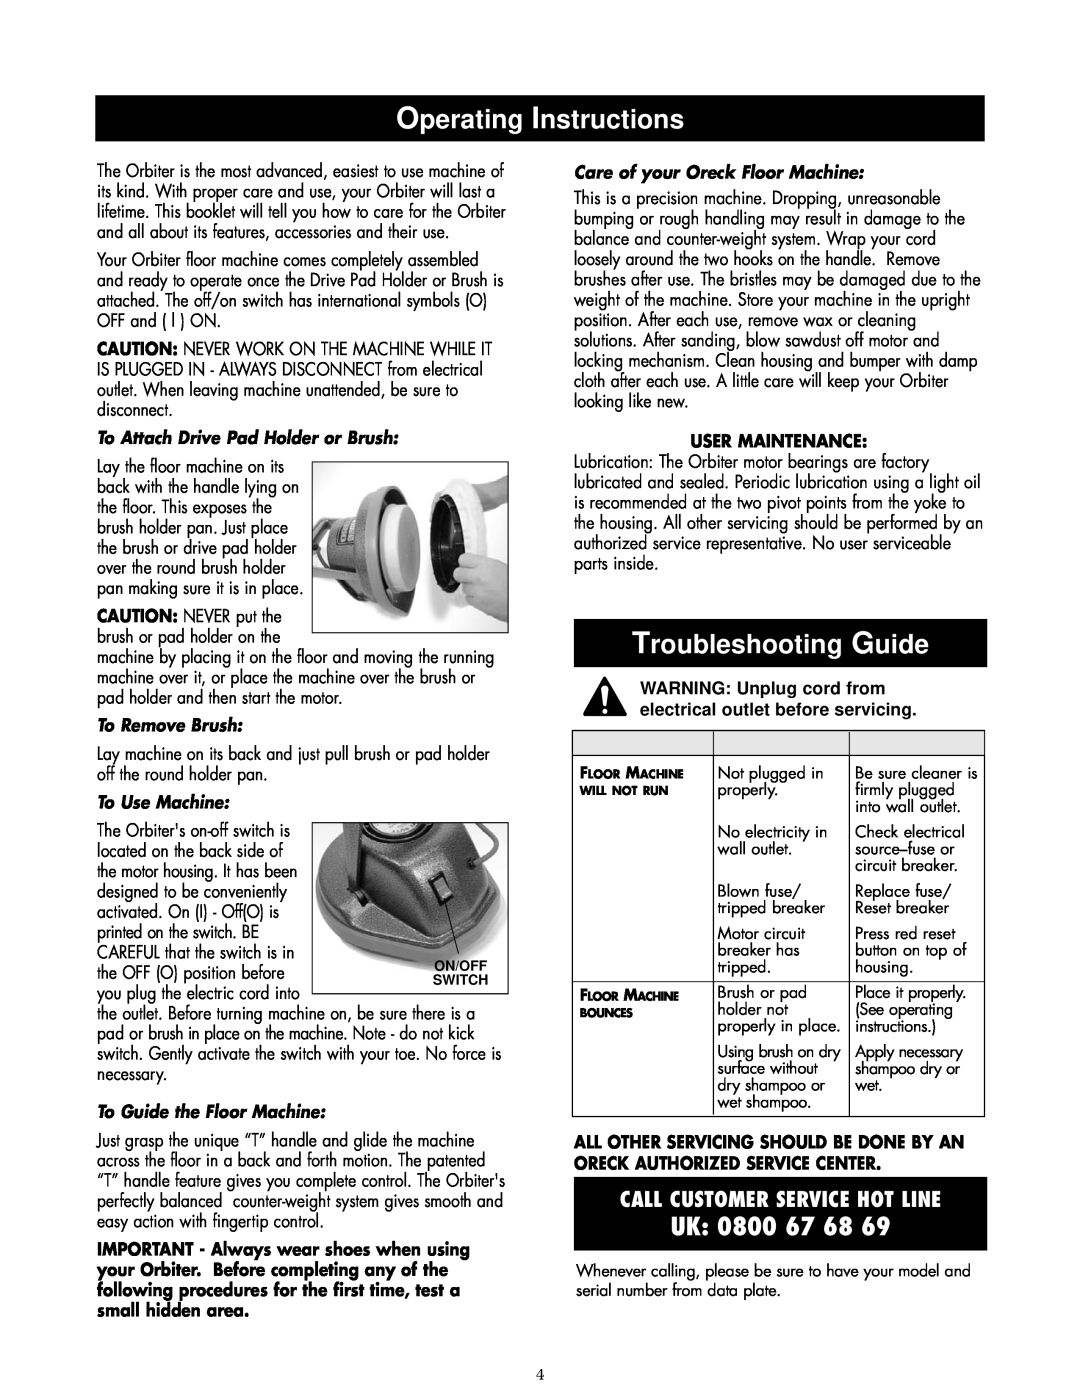 Oreck ORB480 Operating Instructions, Troubleshooting Guide, To Attach Drive Pad Holder or Brush, To Remove Brush, Uk 